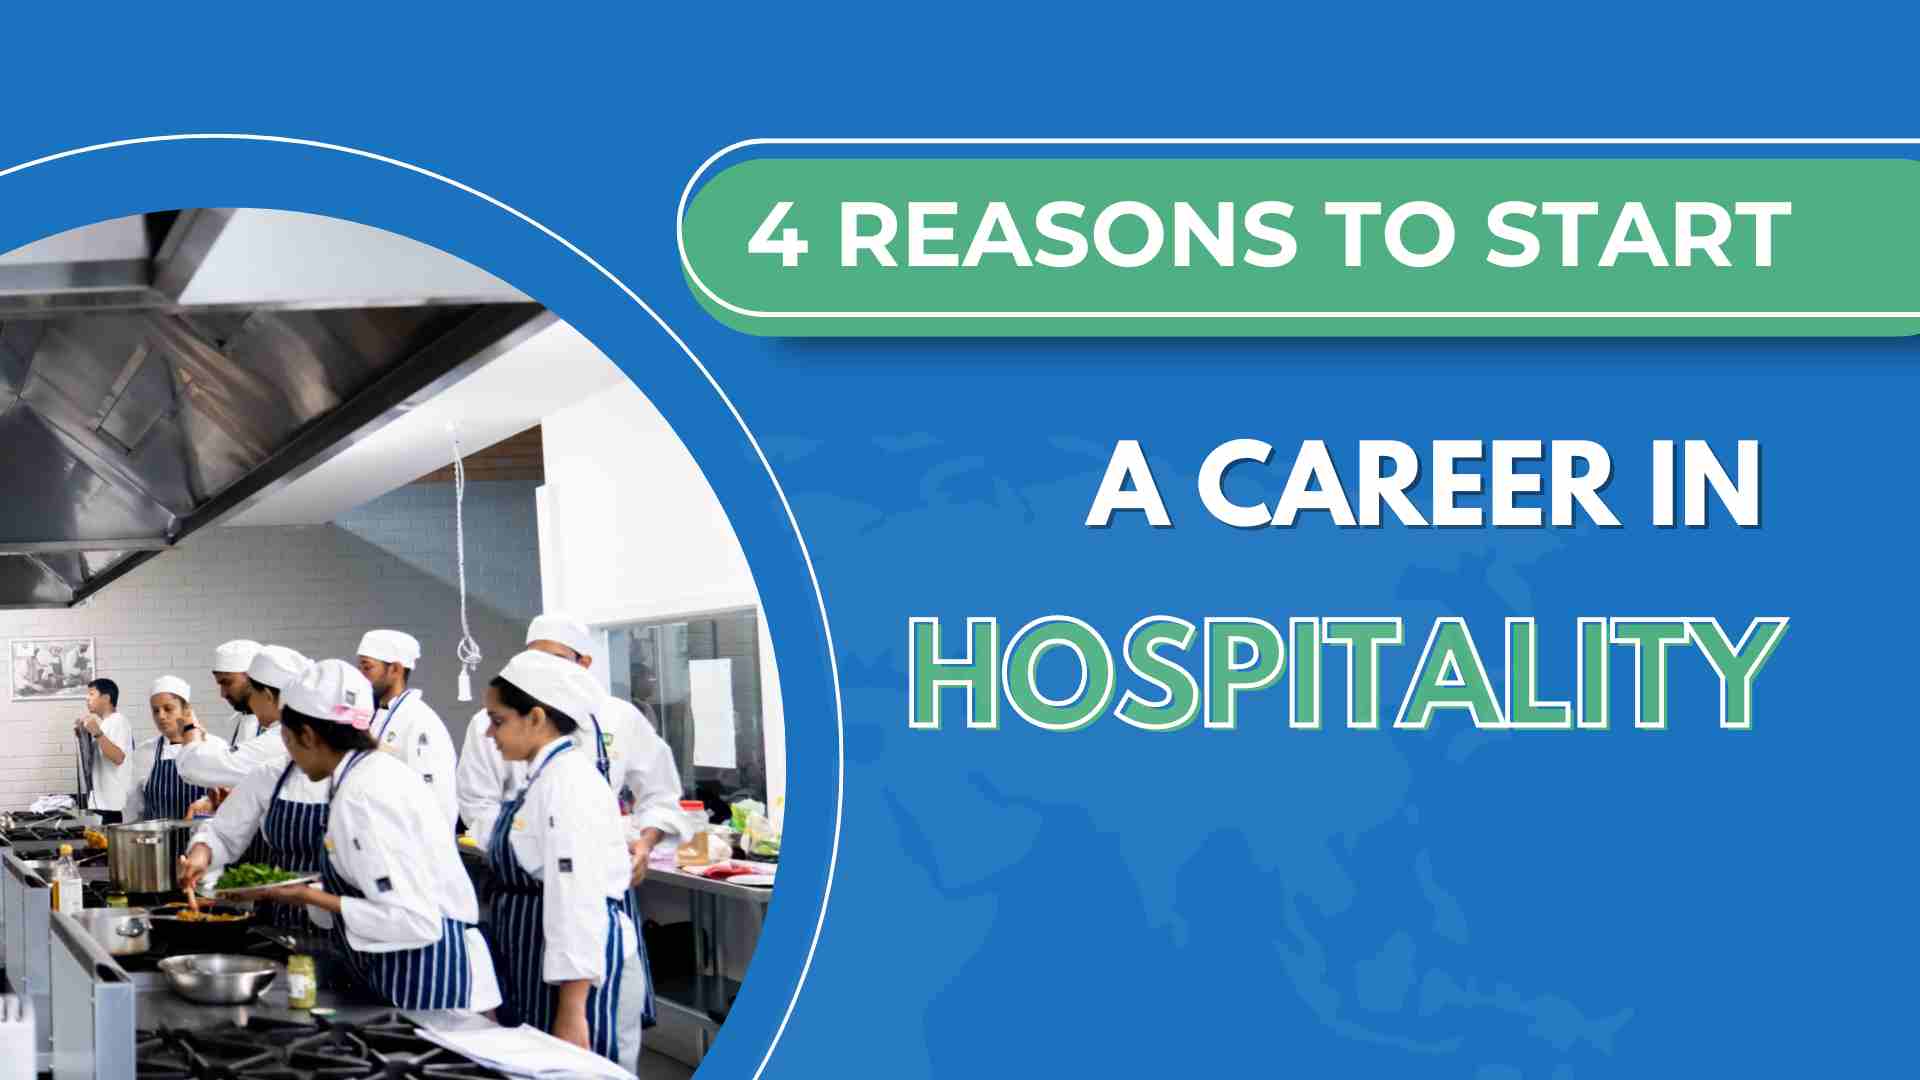 Reasons to start career in hospitality